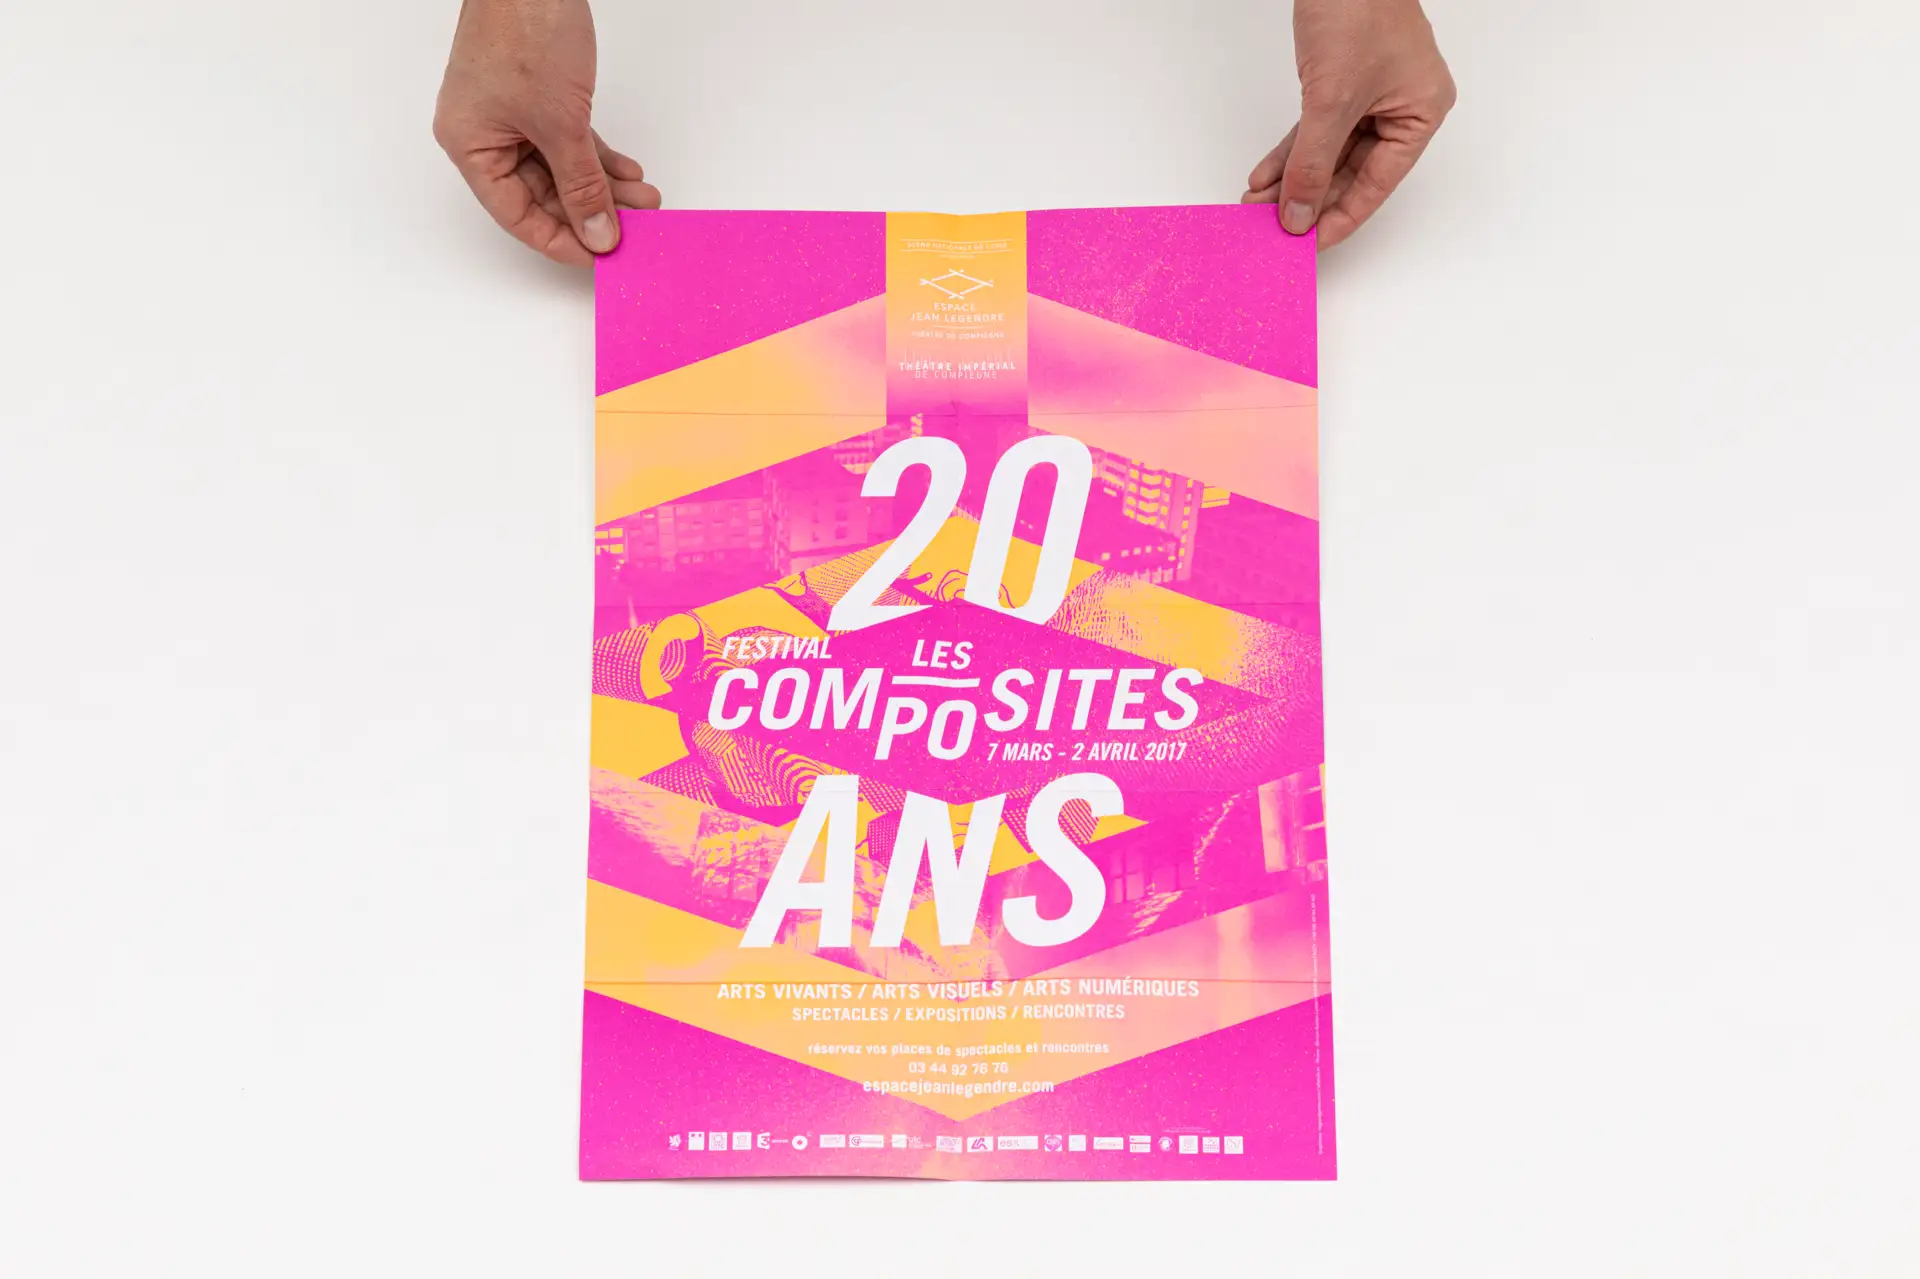 Image presenting the project Festival les Composites